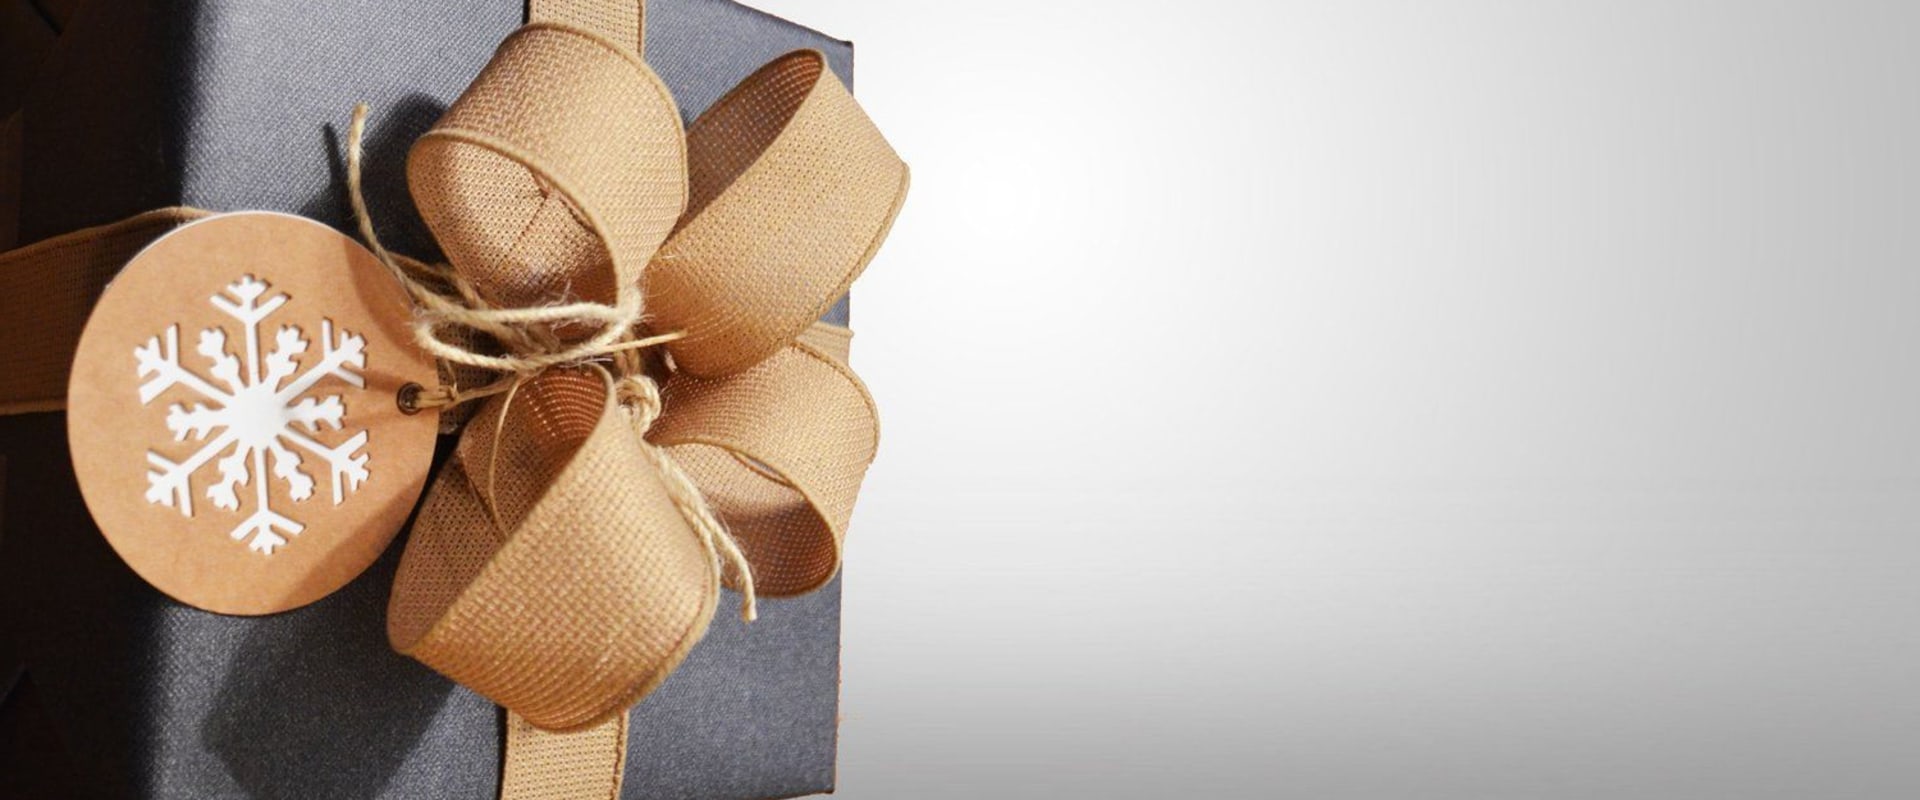 Are christmas gifts to employees tax deductible?